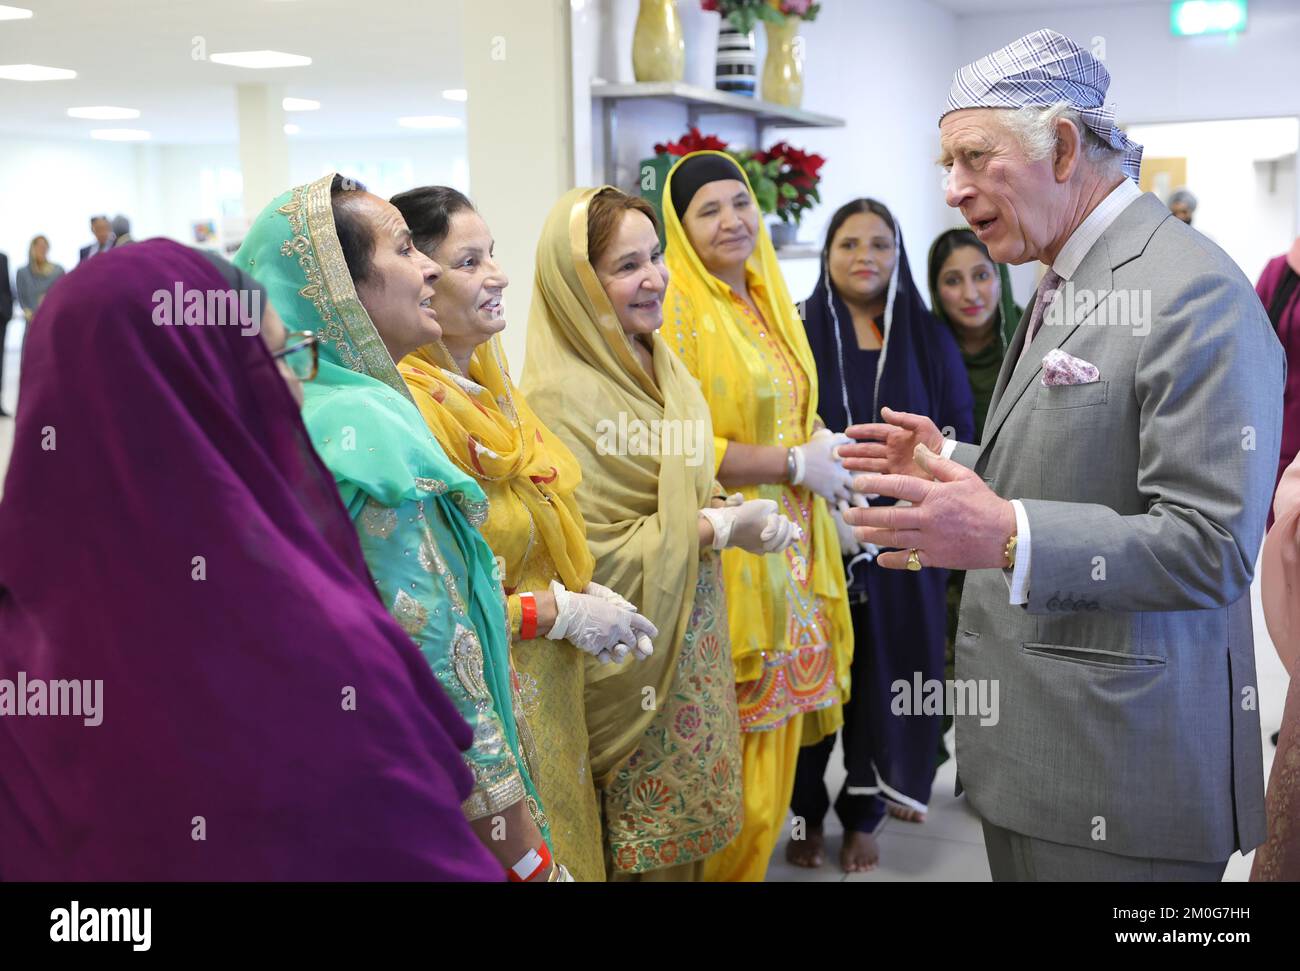 King Charles III speaks to volunteers and learns about the programmes they deliver for the local community during a visit to the newly built Guru Nanak Gurdwara in Luton, to meet volunteers and learn about the programmes they deliver for the local community. Picture date: Tuesday December 6, 2022. Stock Photo